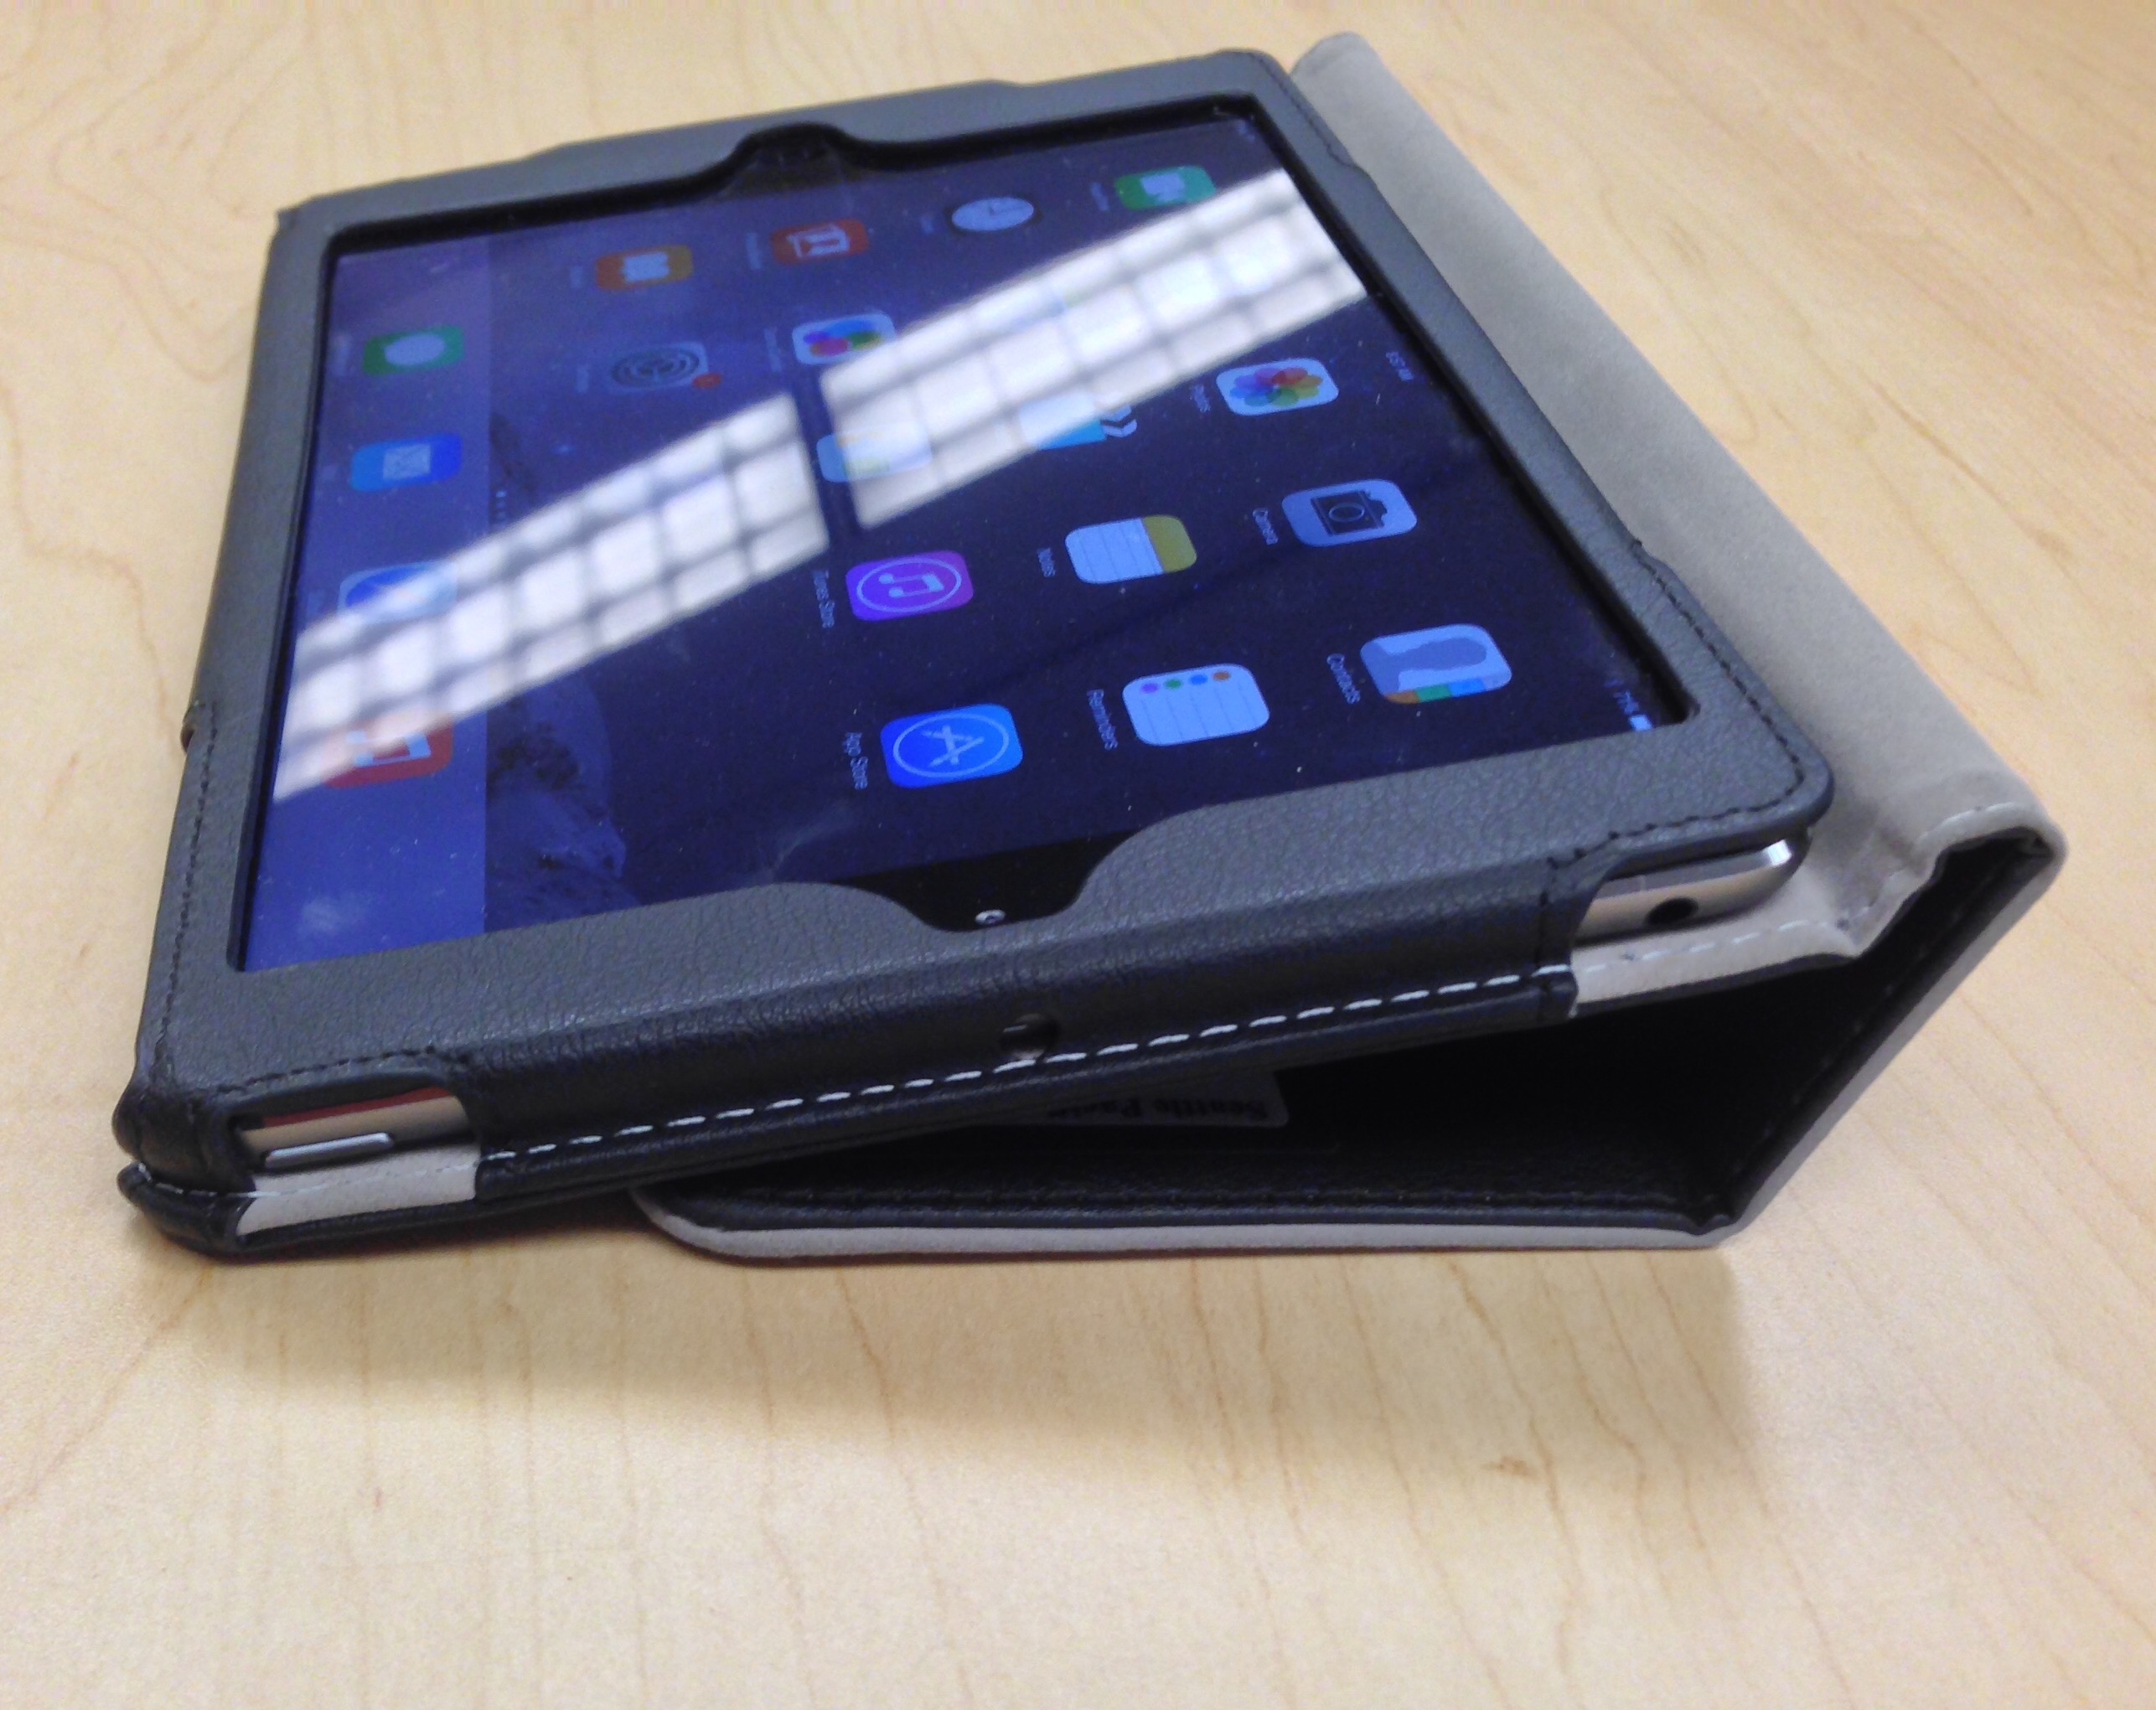 iPad Mini with case propped up